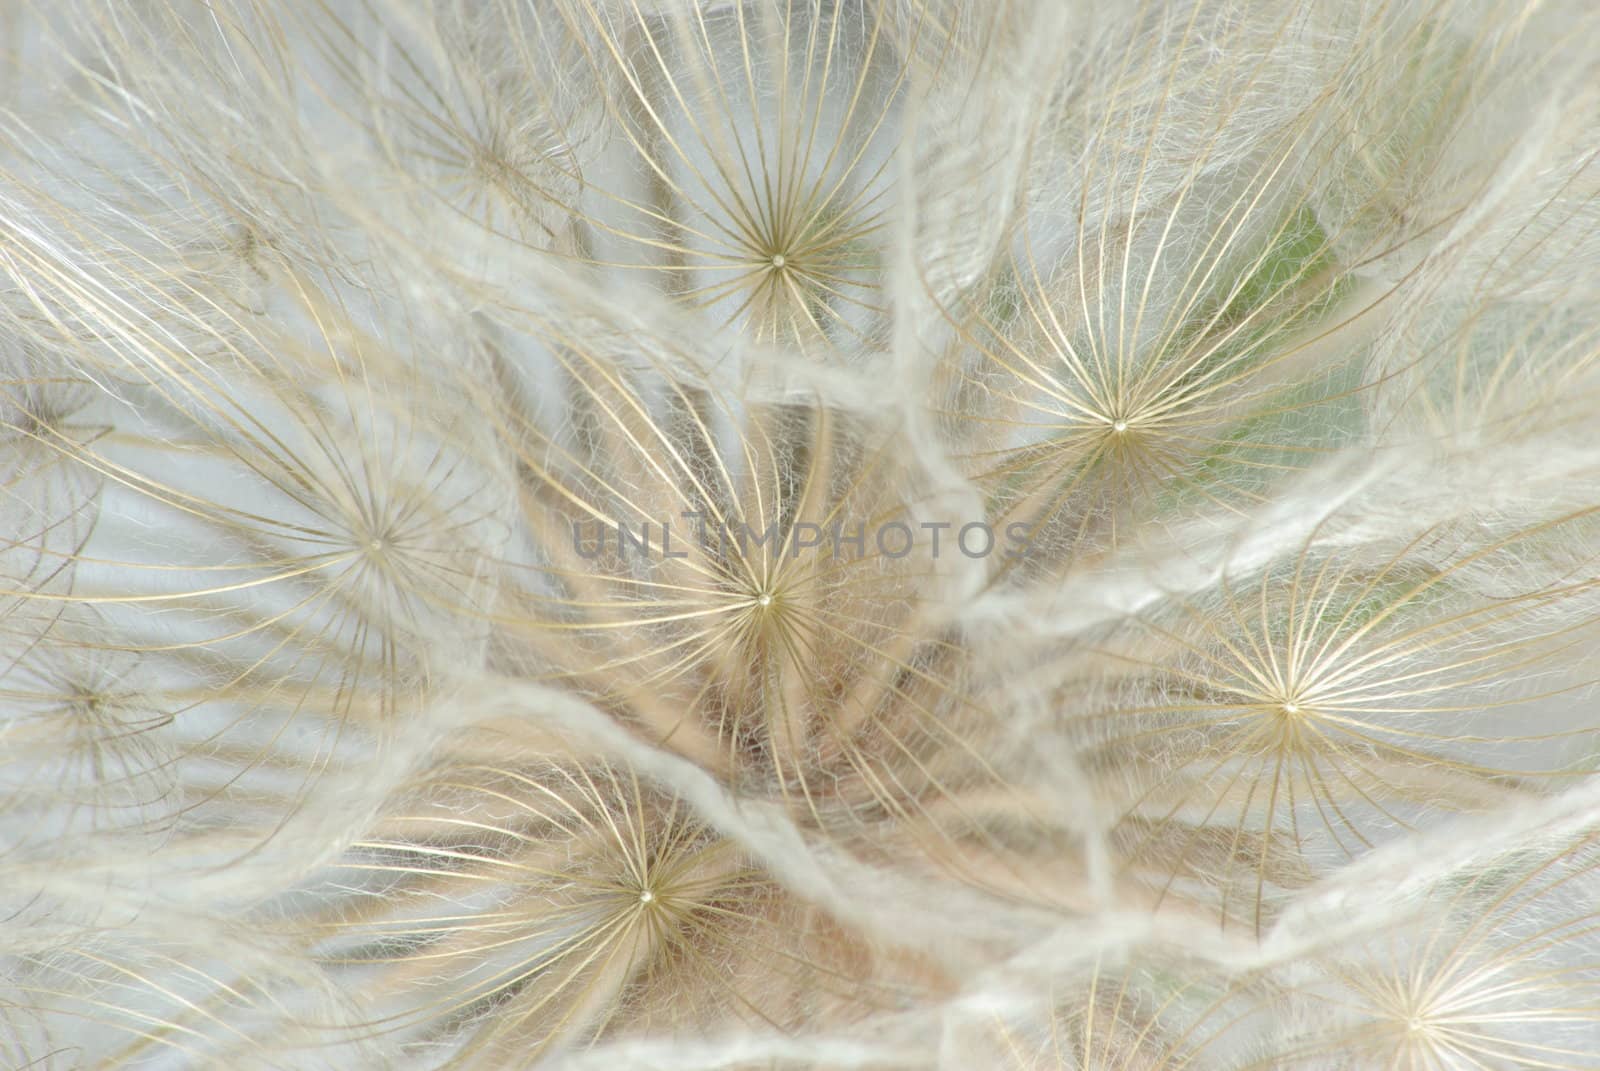 Macro view looking into the seed umbrelas of a Dandelion showing the fine detail.